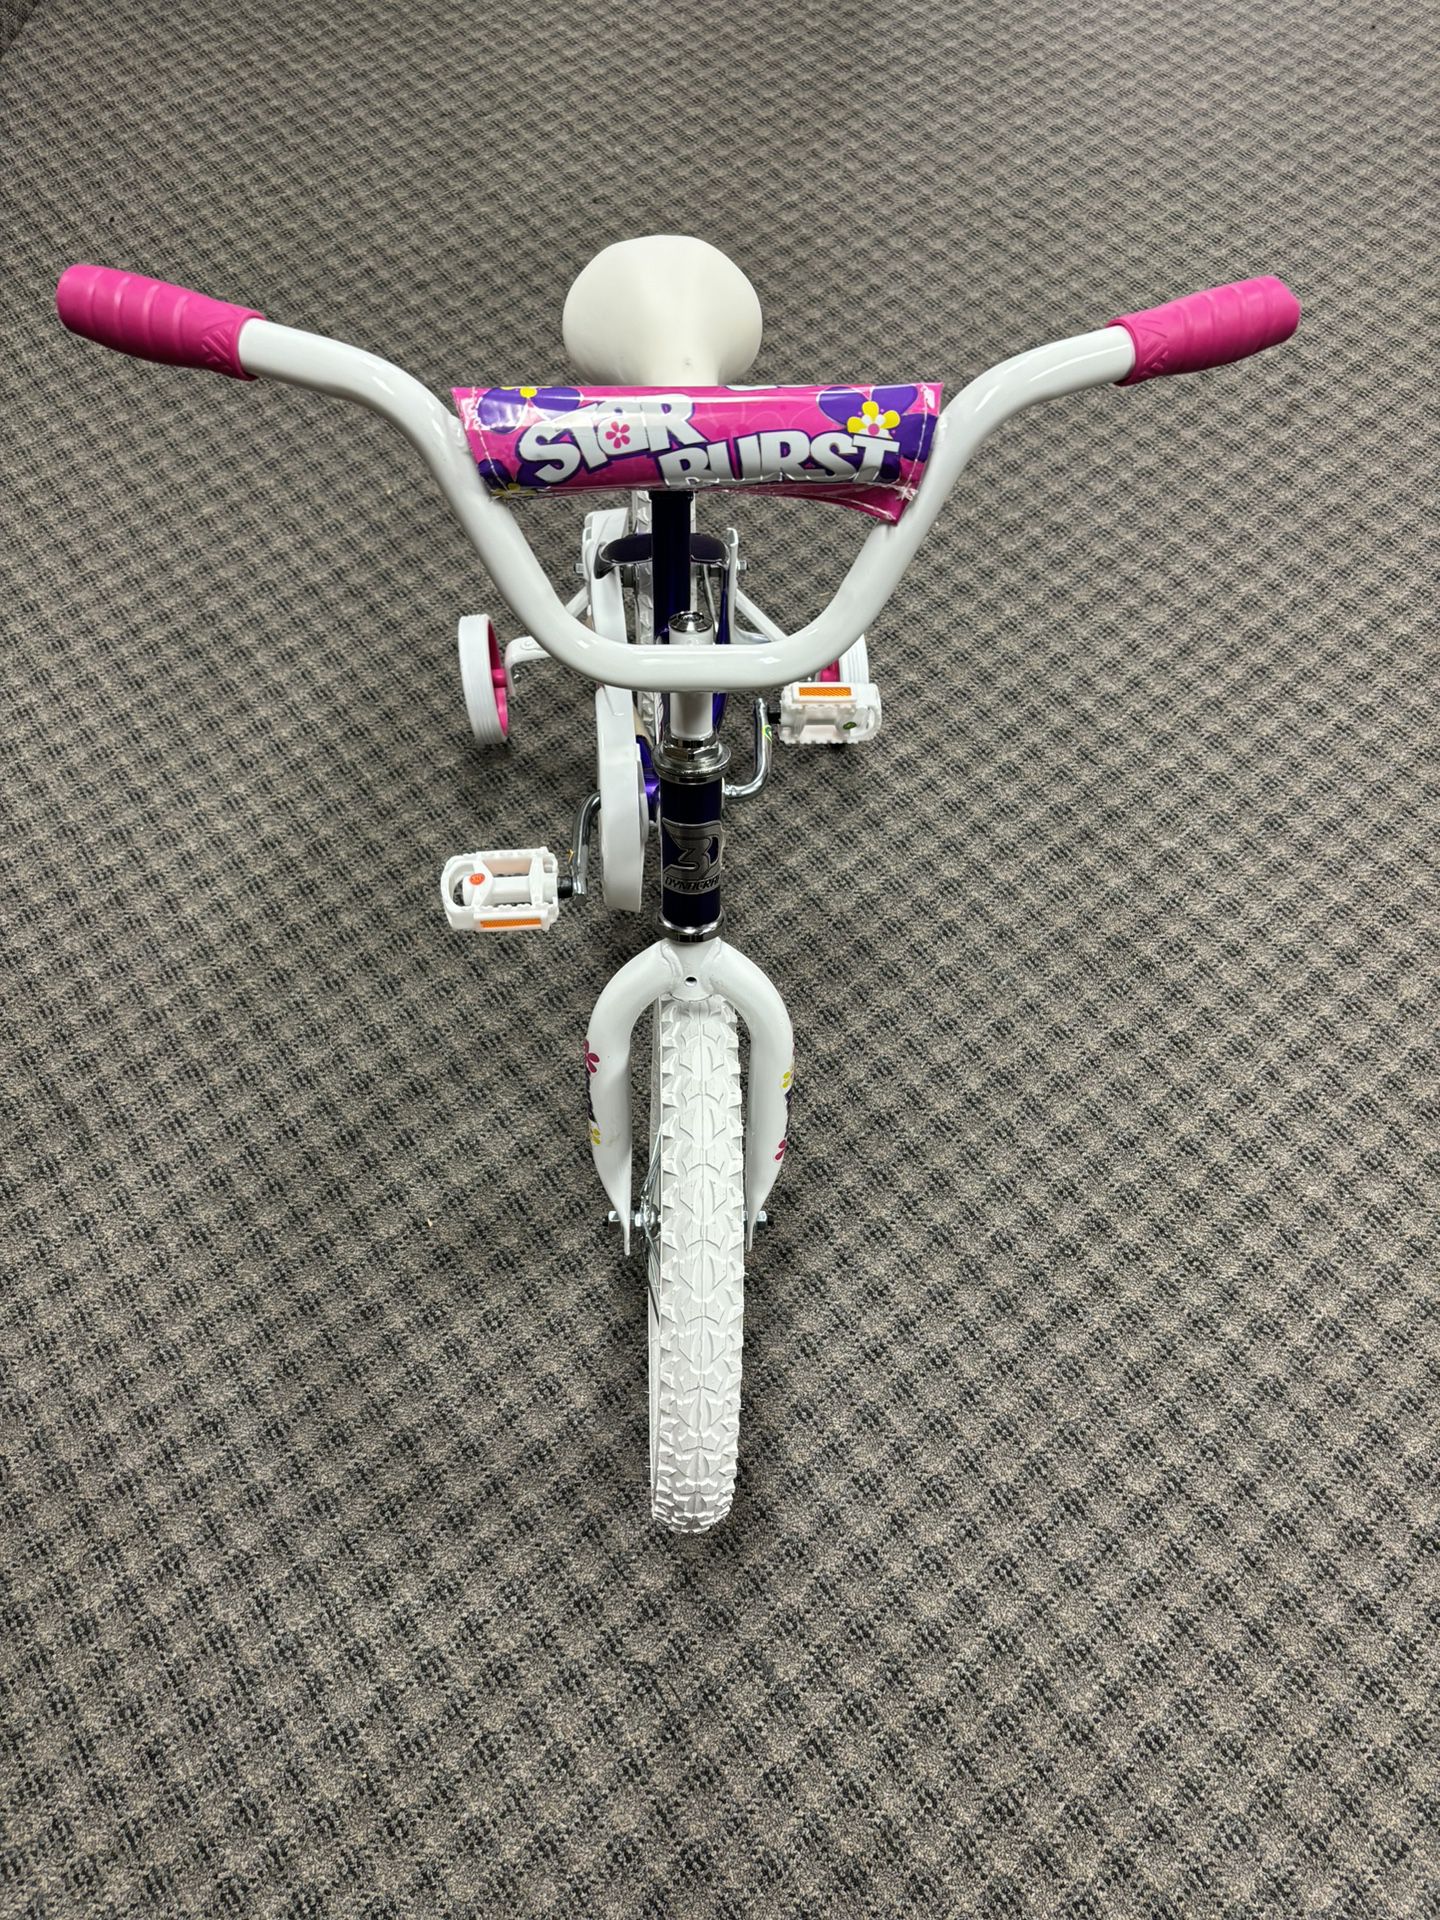 Dynacraft Starburst Girls Bike 16” Open Box - New and Assembled with Training Wheels